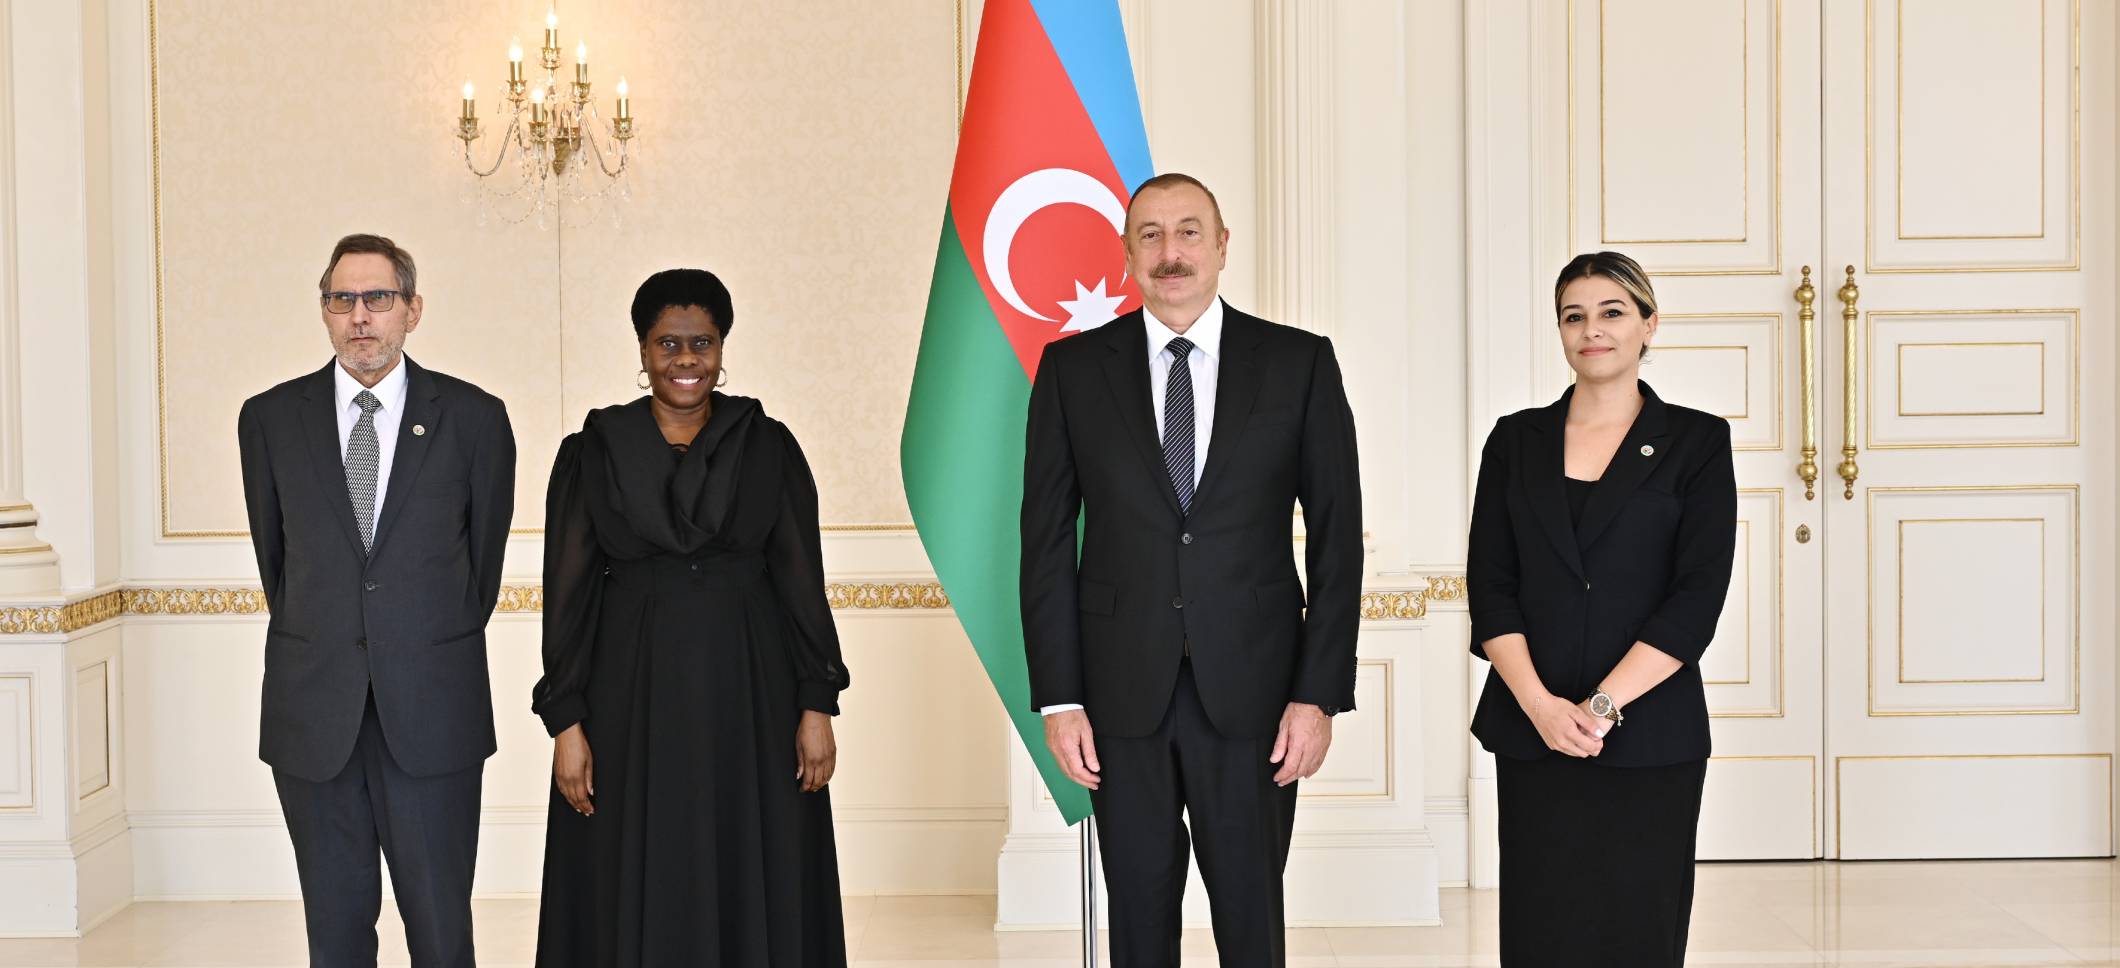 Ilham Aliyev accepted credentials of incoming ambassador of South Africa